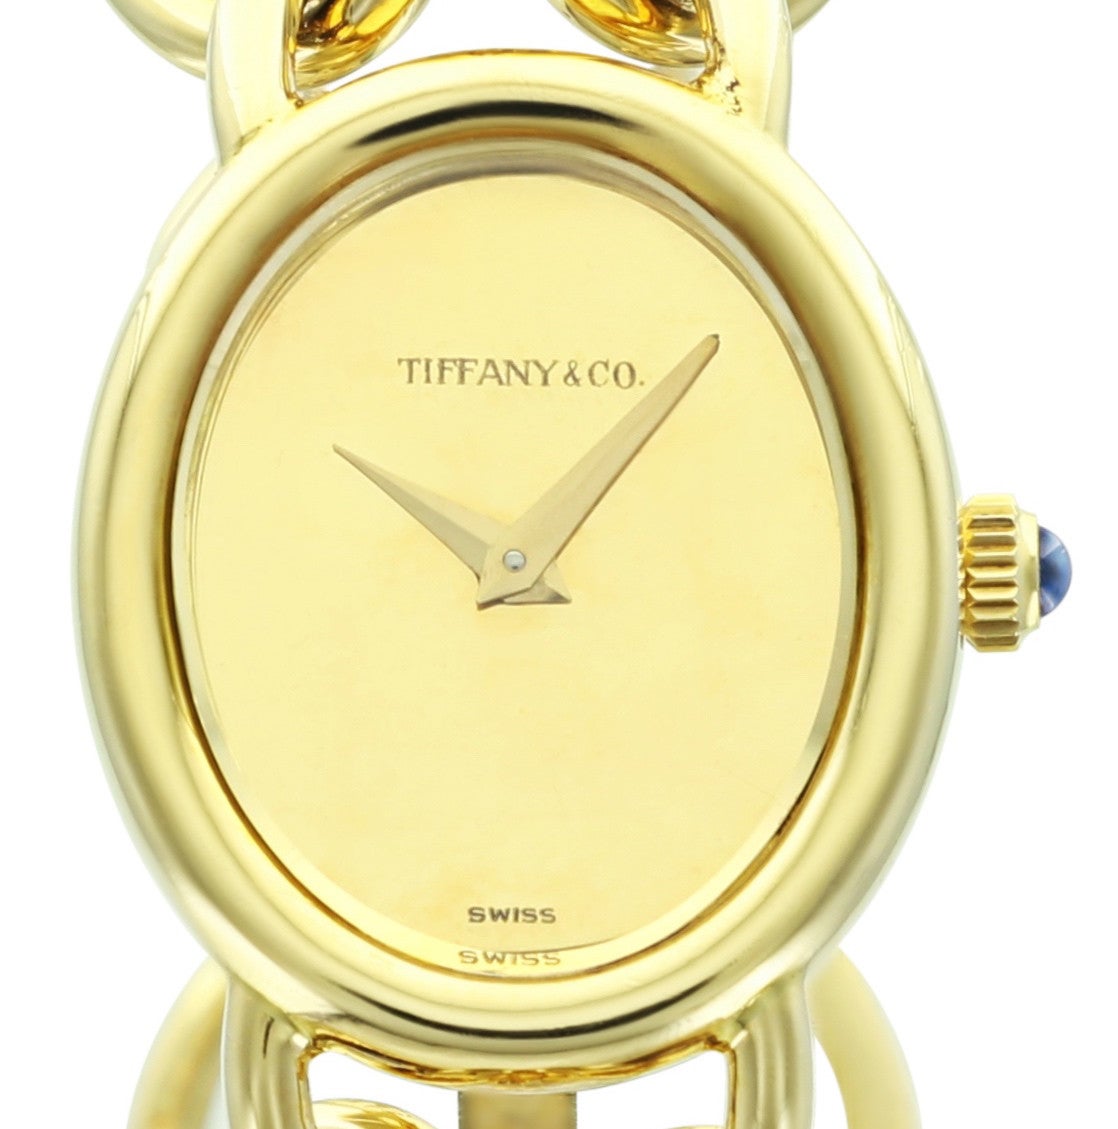 This yellow gold Tiffany & Co. ladies watch is a small, elegant piece with 18k gold linked bracelet and champagne dial stamped 